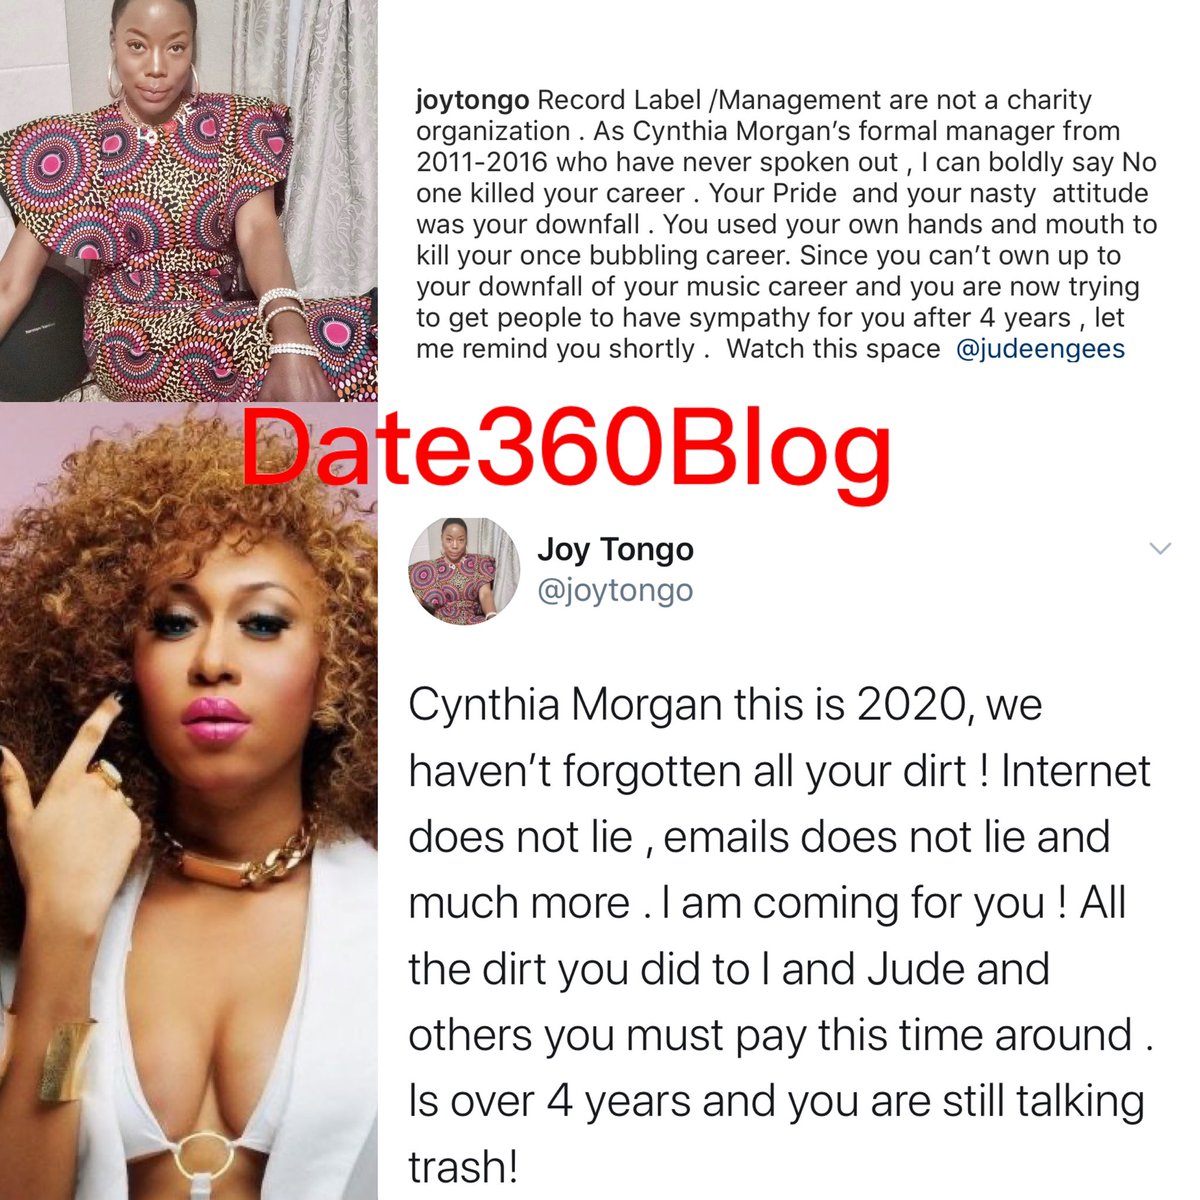 Cynthia Morgan is a Liar, She’s owing over $30,000 and seeking for self pity - Ex Boss/Manager Responds.  #Naijablogger.